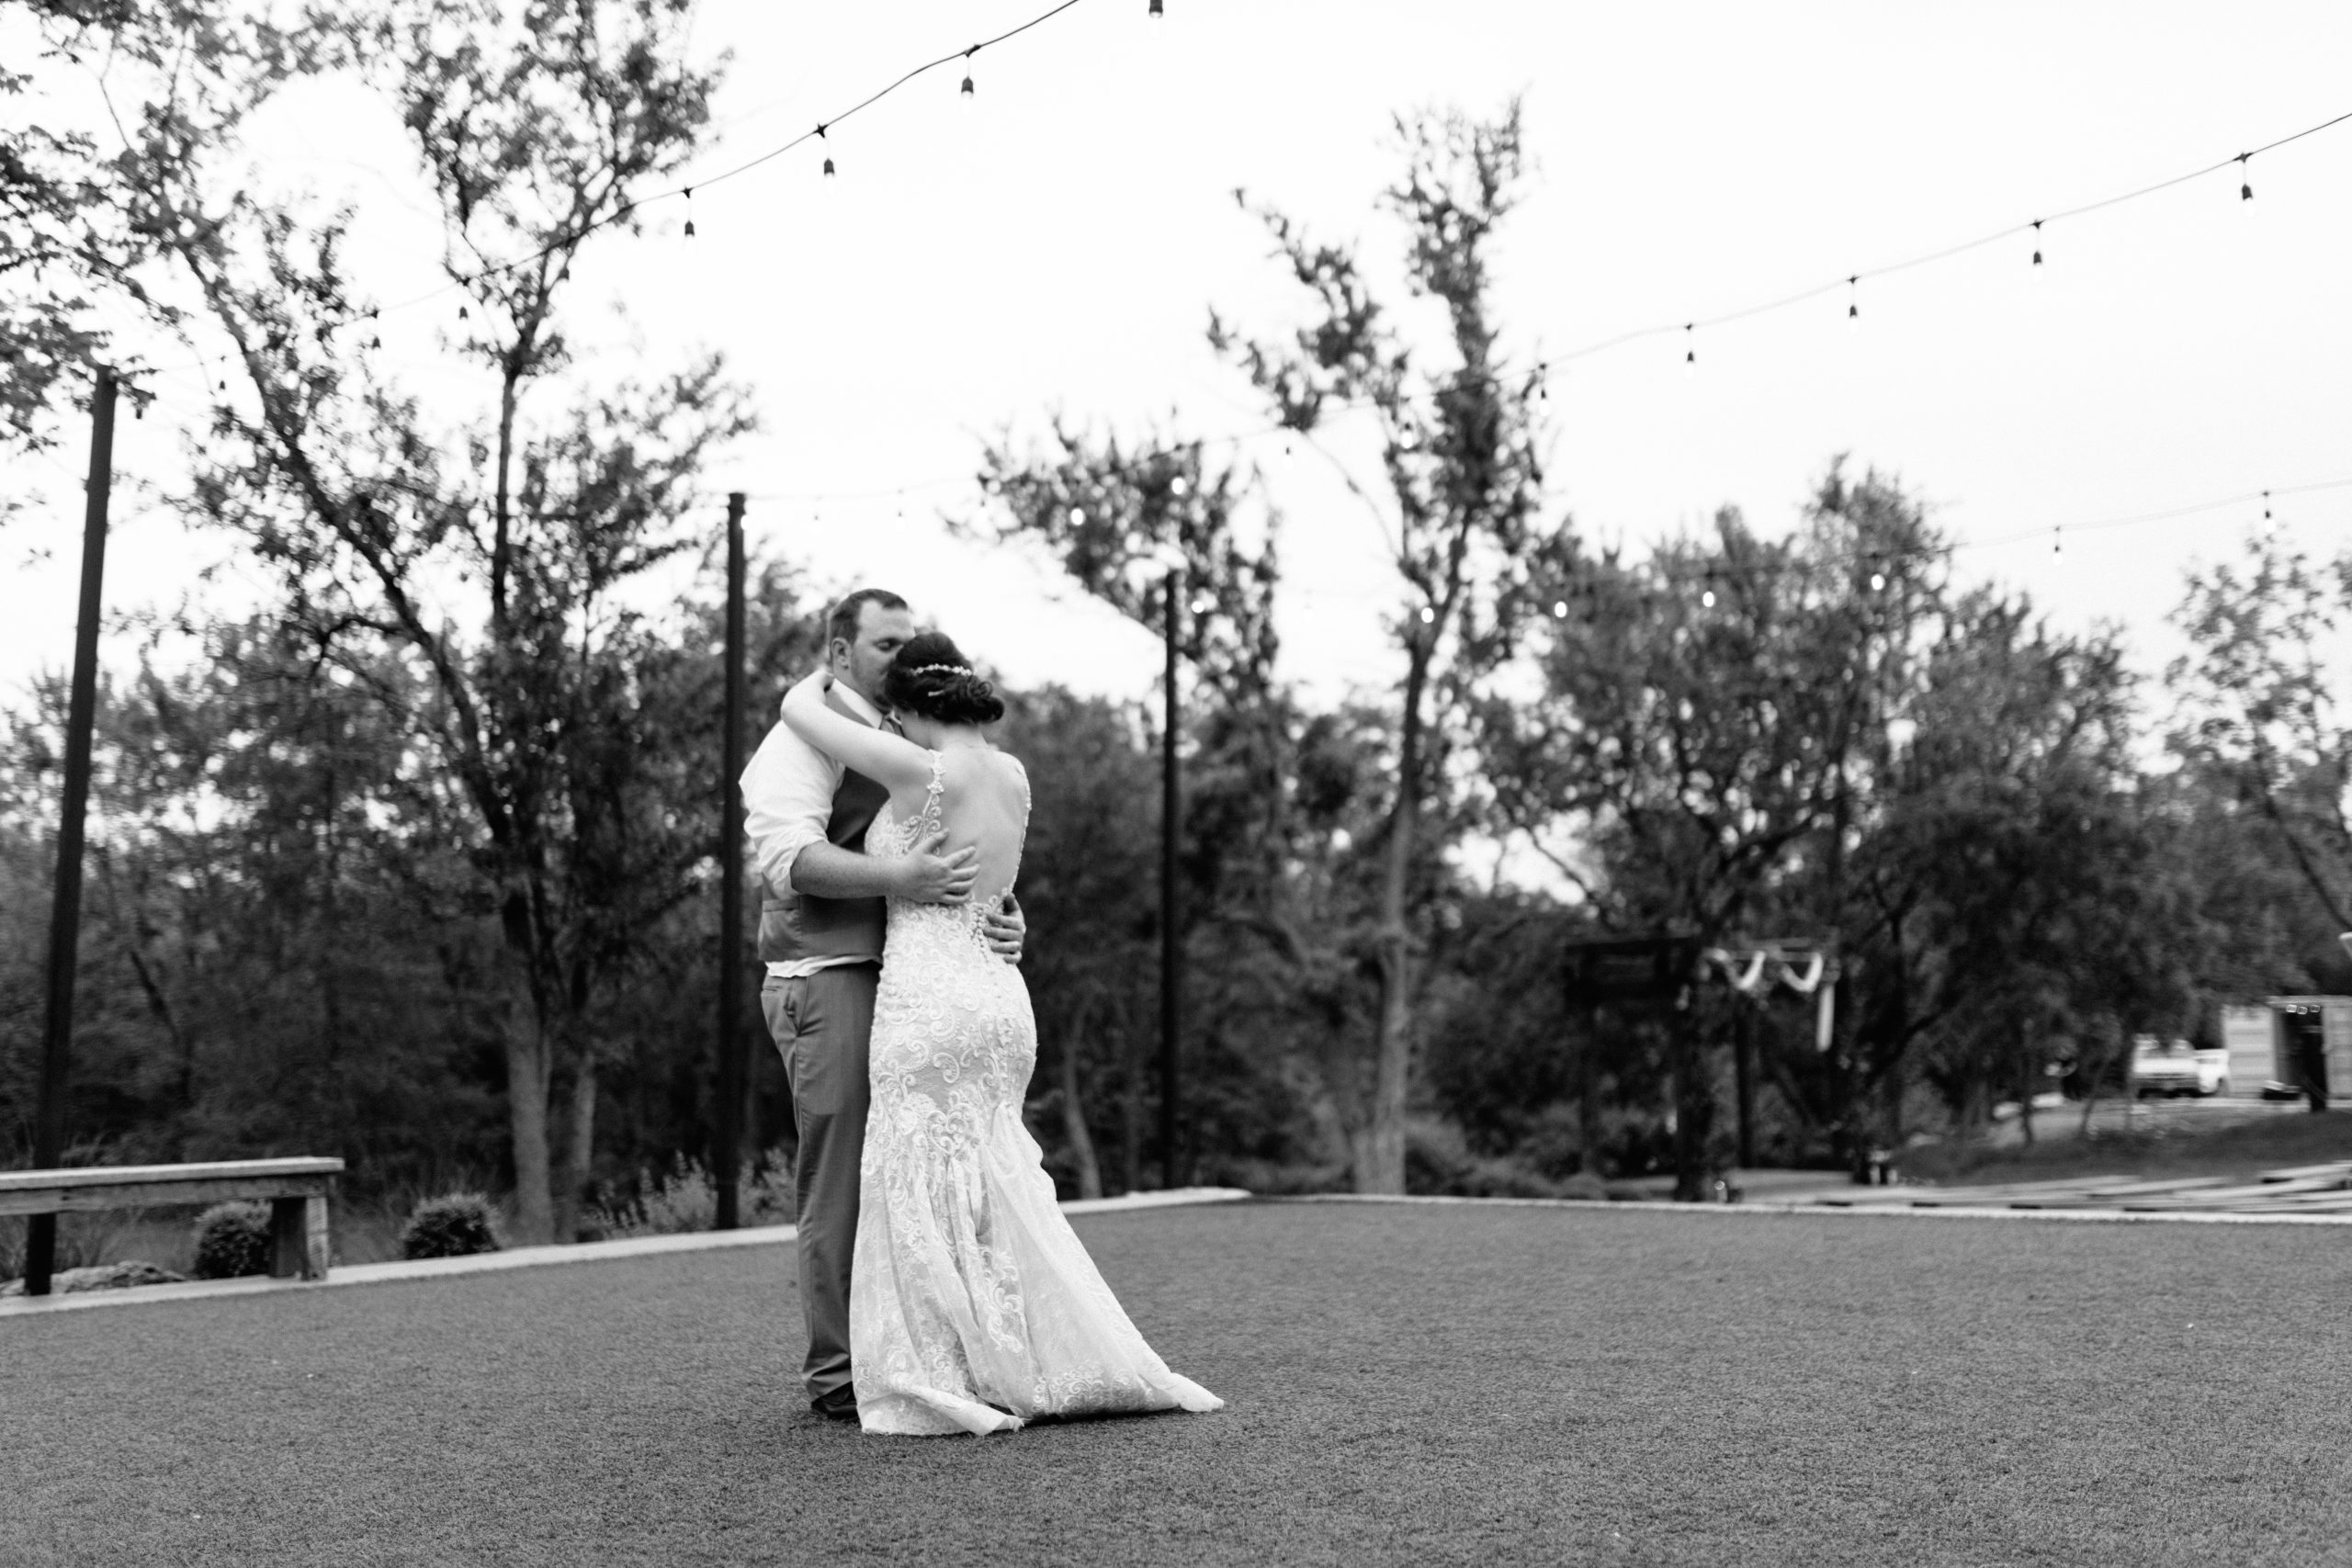 outdoors first dance at wedding